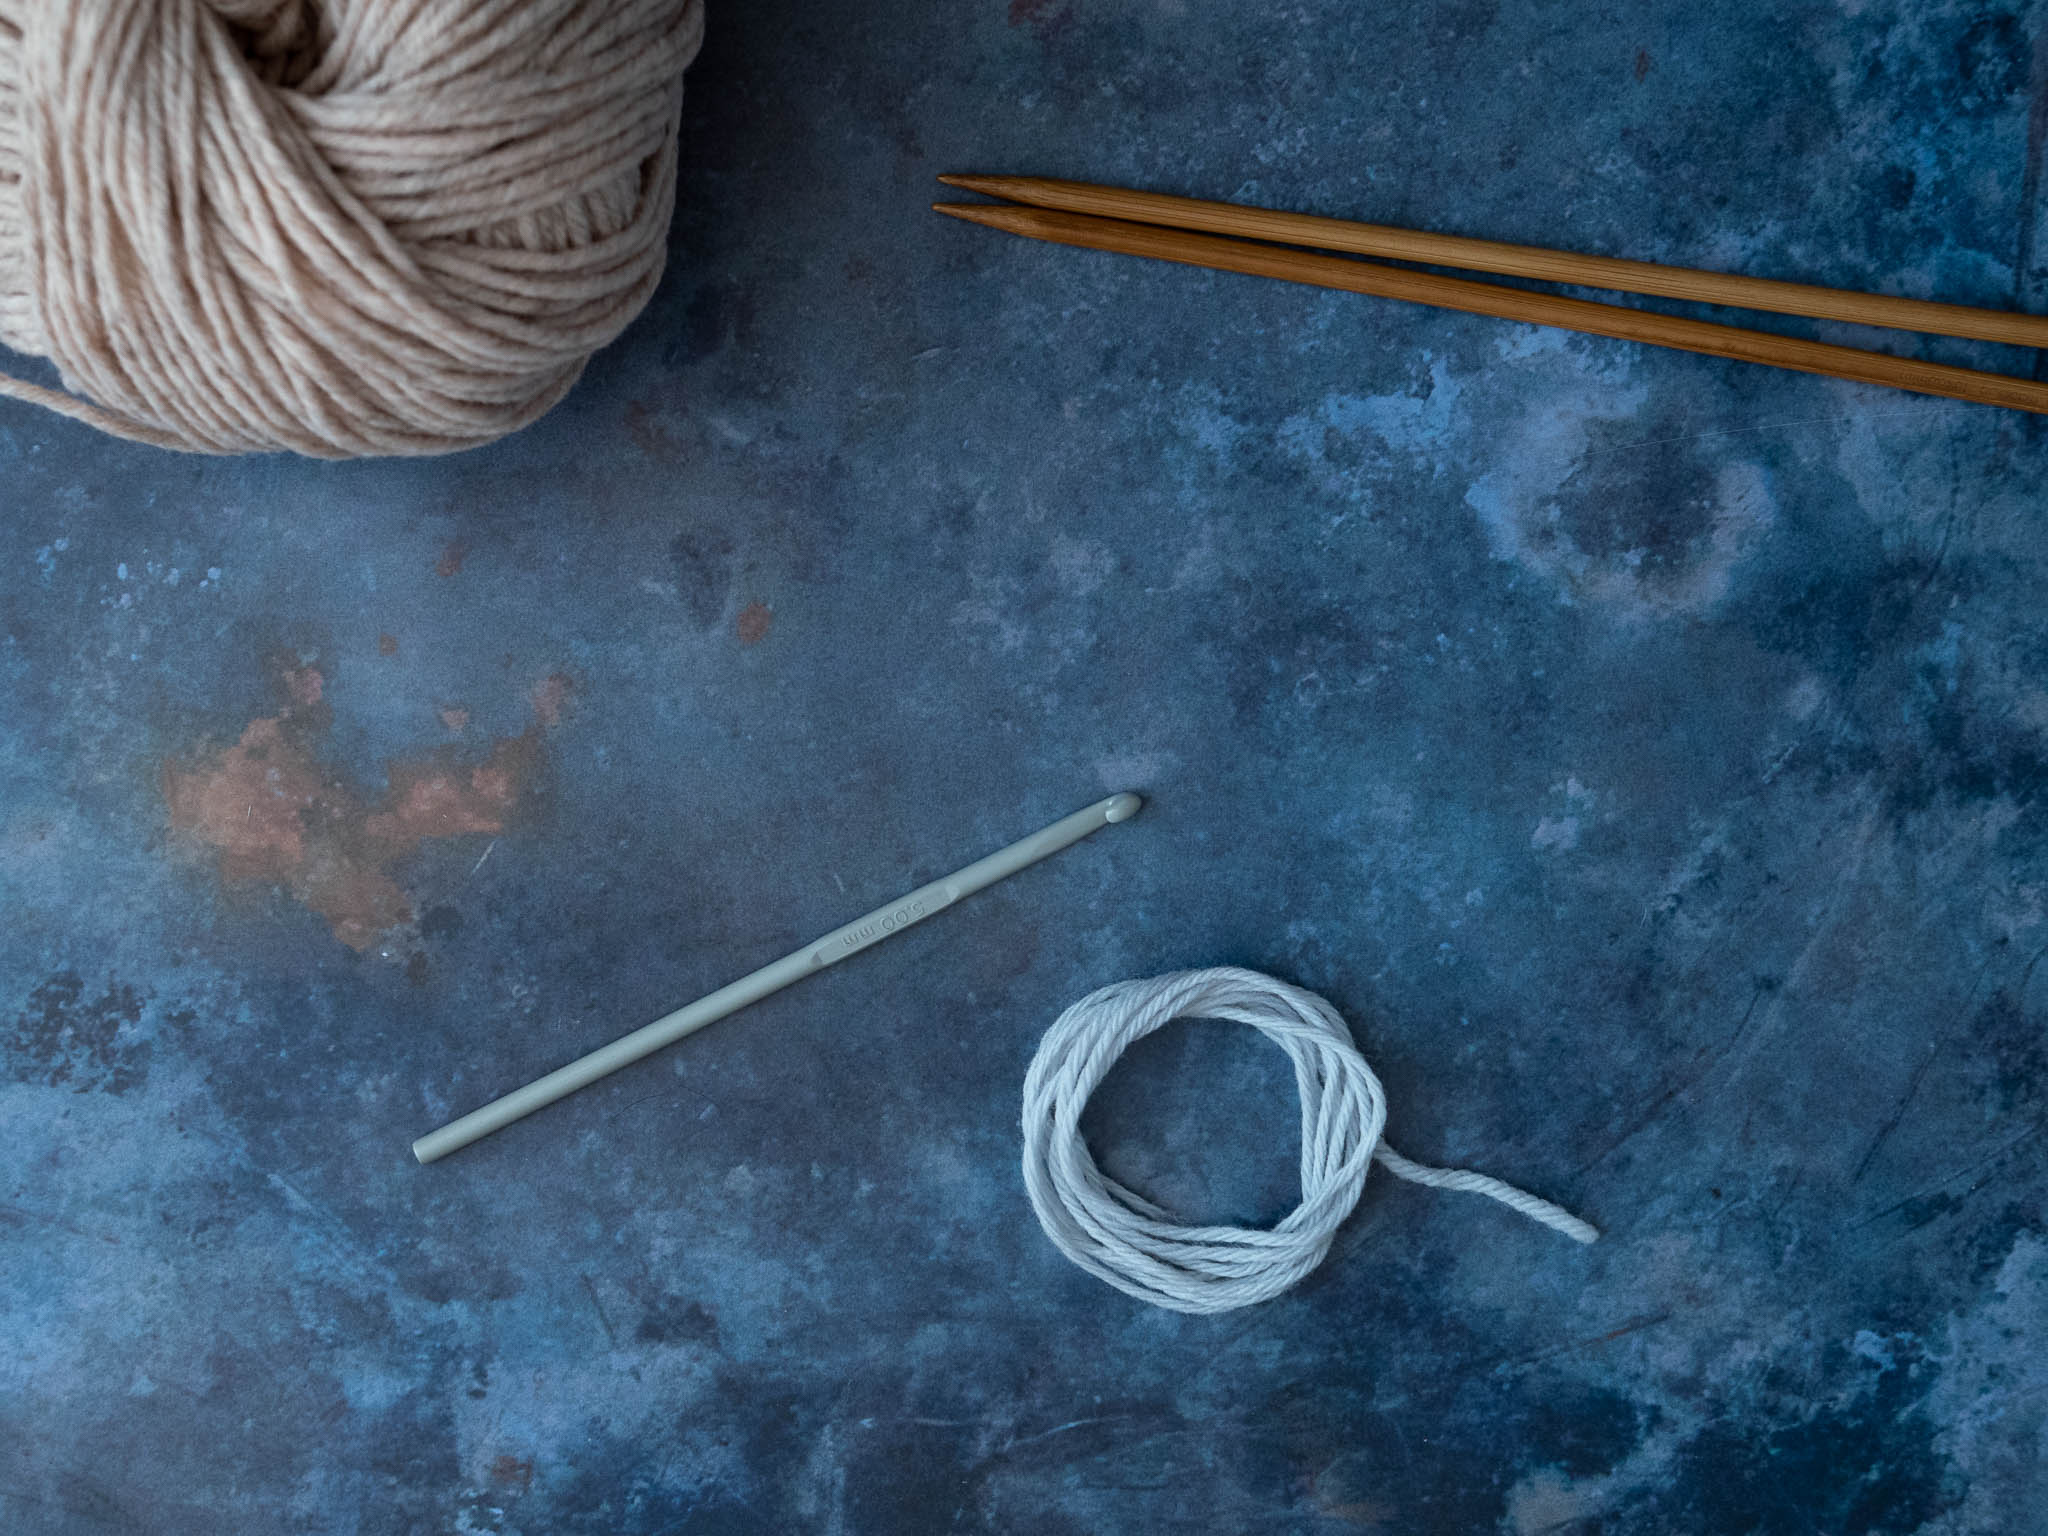 A mottled blue desk surface with a ball of beige yarn, a pair of knitting needles, some light blue scrap yarn, and a crochet hook.